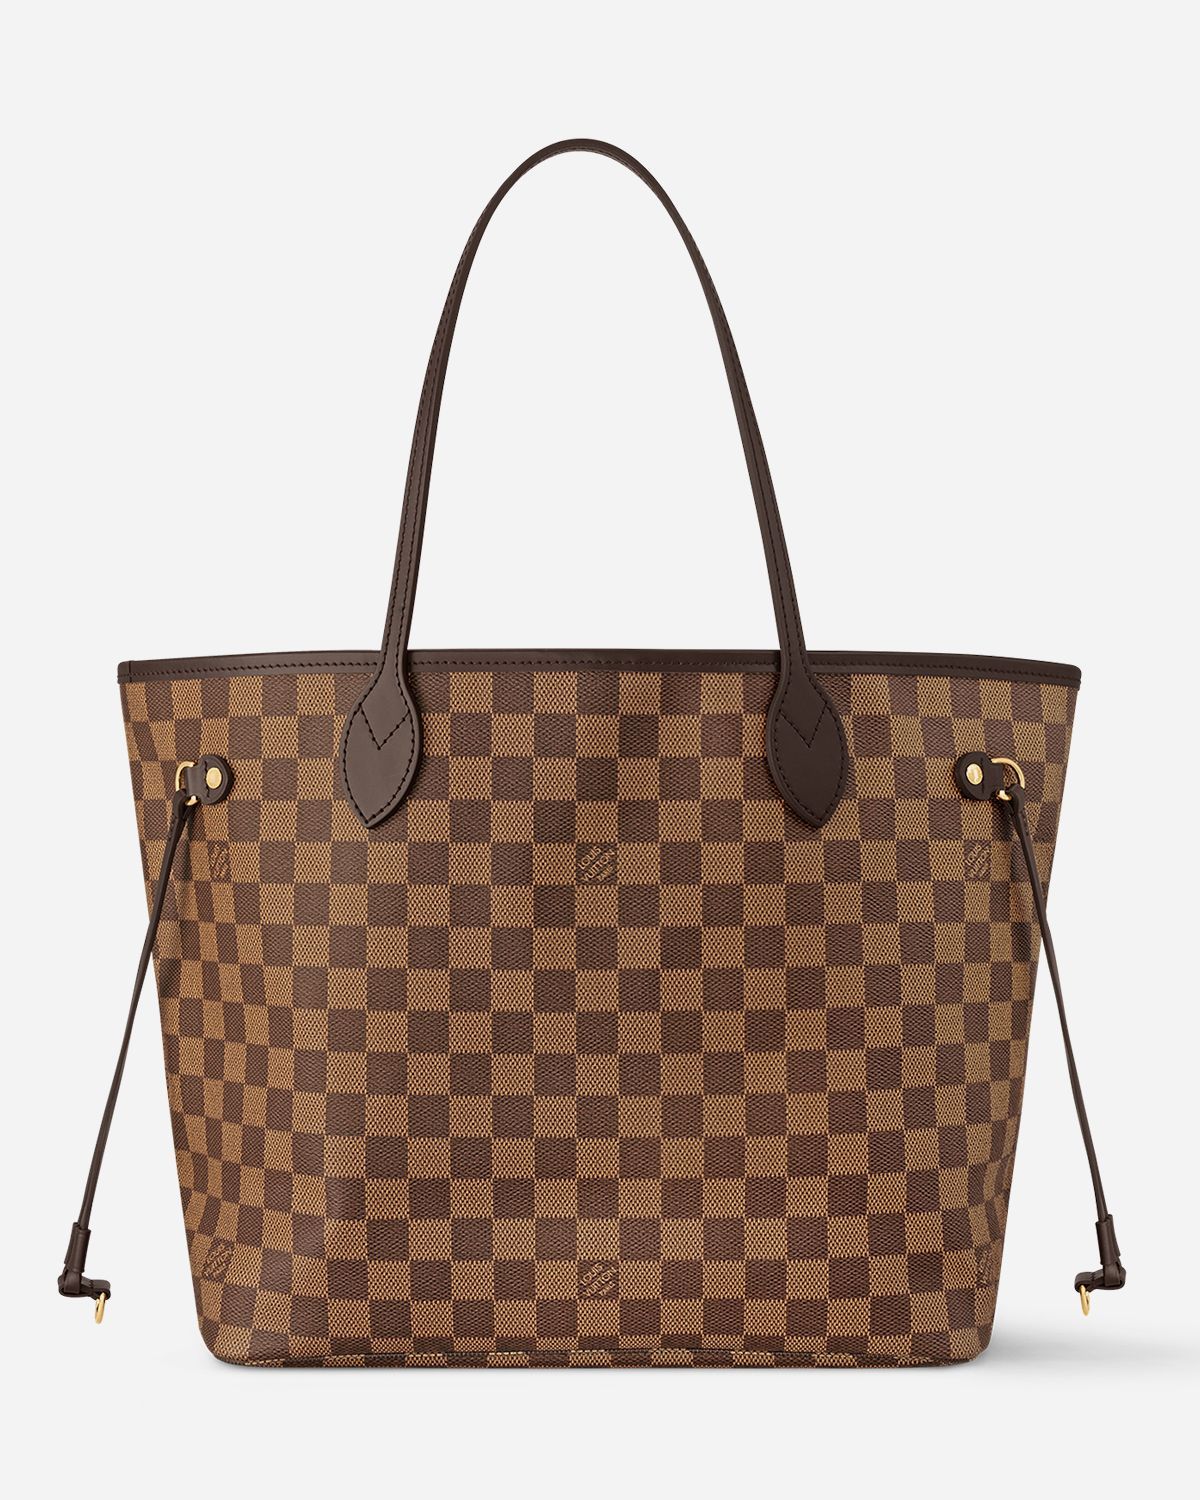 <p><strong>$2030.00</strong></p><p><a href="https://us.louisvuitton.com/eng-us/products/neverfull-mm-damier-ebene-nvprod5350102v/N40598">Shop Now</a></p><p>Few things feel quite as iconic as Louis Vuitton’s checkered print. And hands down, this classic designer tote will always be a chic option—no matter where you’re headed.</p><p><strong>Material:</strong> Damier Ebene</p><p><strong>Colors:</strong> Cherry, Rose Ballerine</p><p><strong>Dimensions:</strong> Height: 11 inches; width: 12.2 inches; depth: 5.5 inches</p>